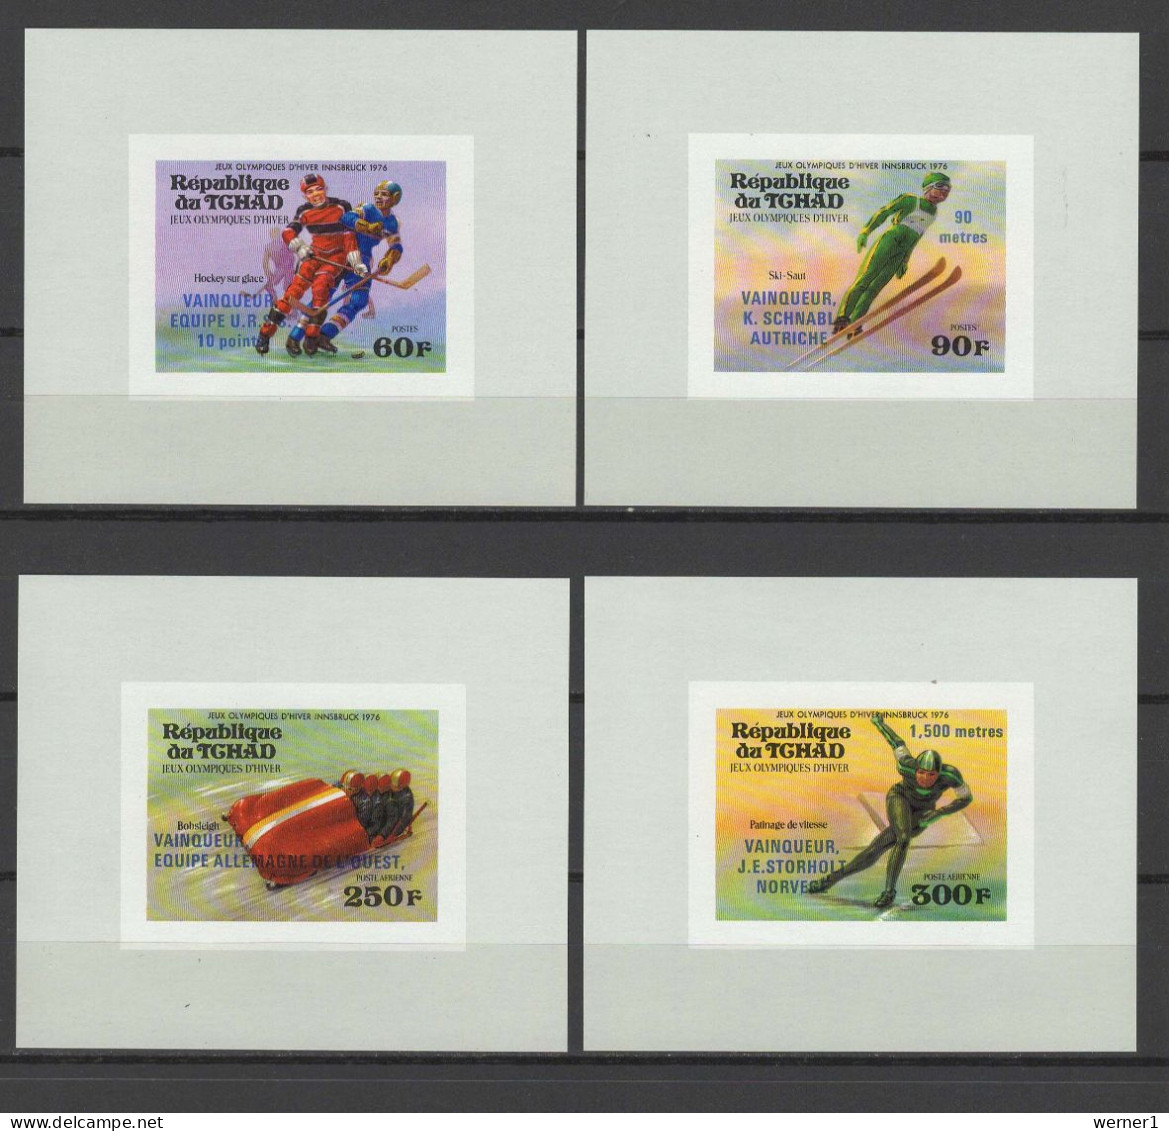 Chad - Tchad 1976 Olympic Games Innsbruck Set Of 4 S/s With Winners Overprint In Blue Imperf. MNH -scarce- - Hiver 1976: Innsbruck